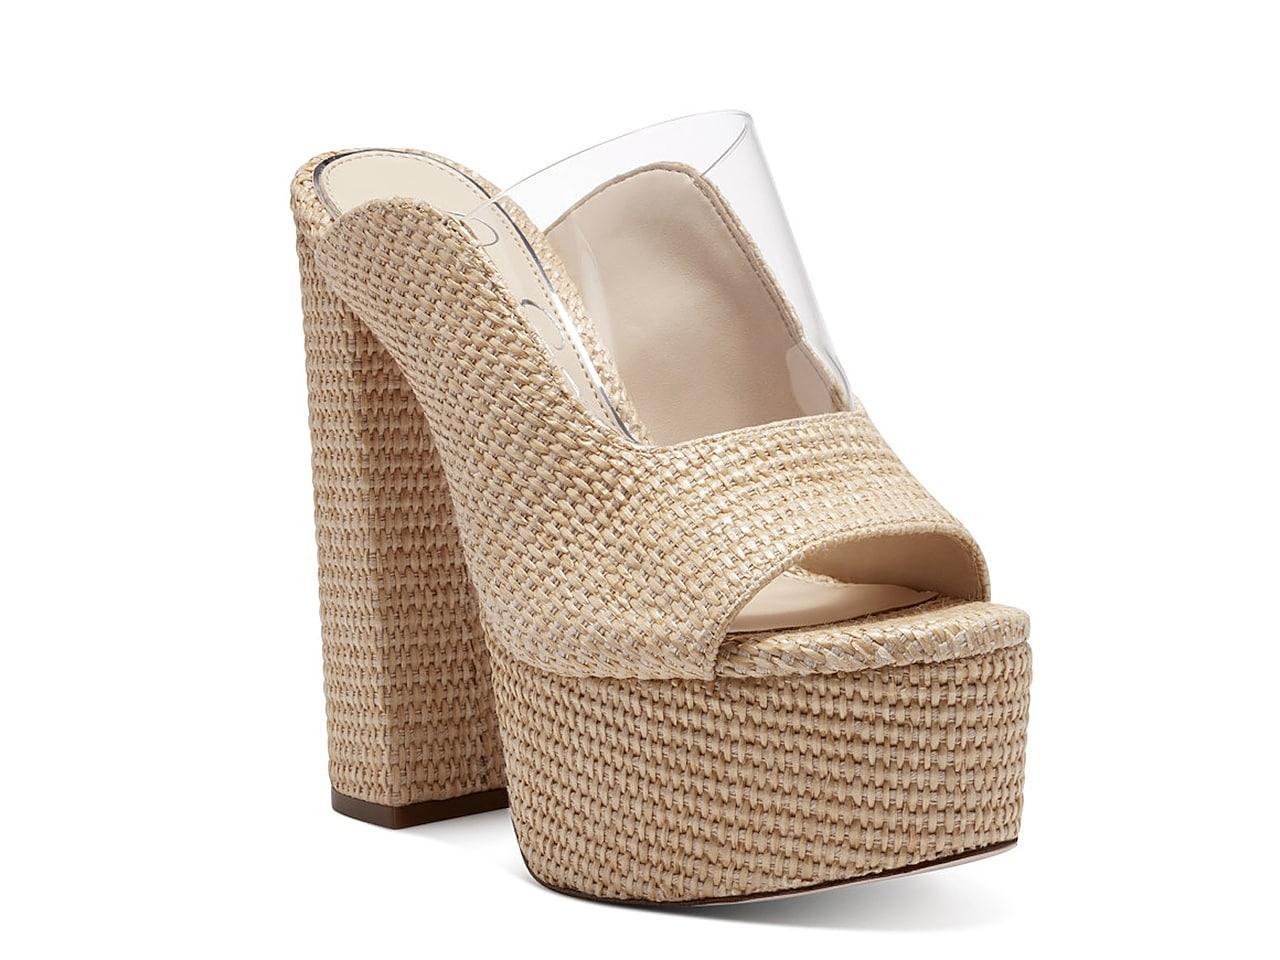 Jessica Simpson Synthetic Annalyn Platform Sandal in Light Brown (Brown) |  Lyst